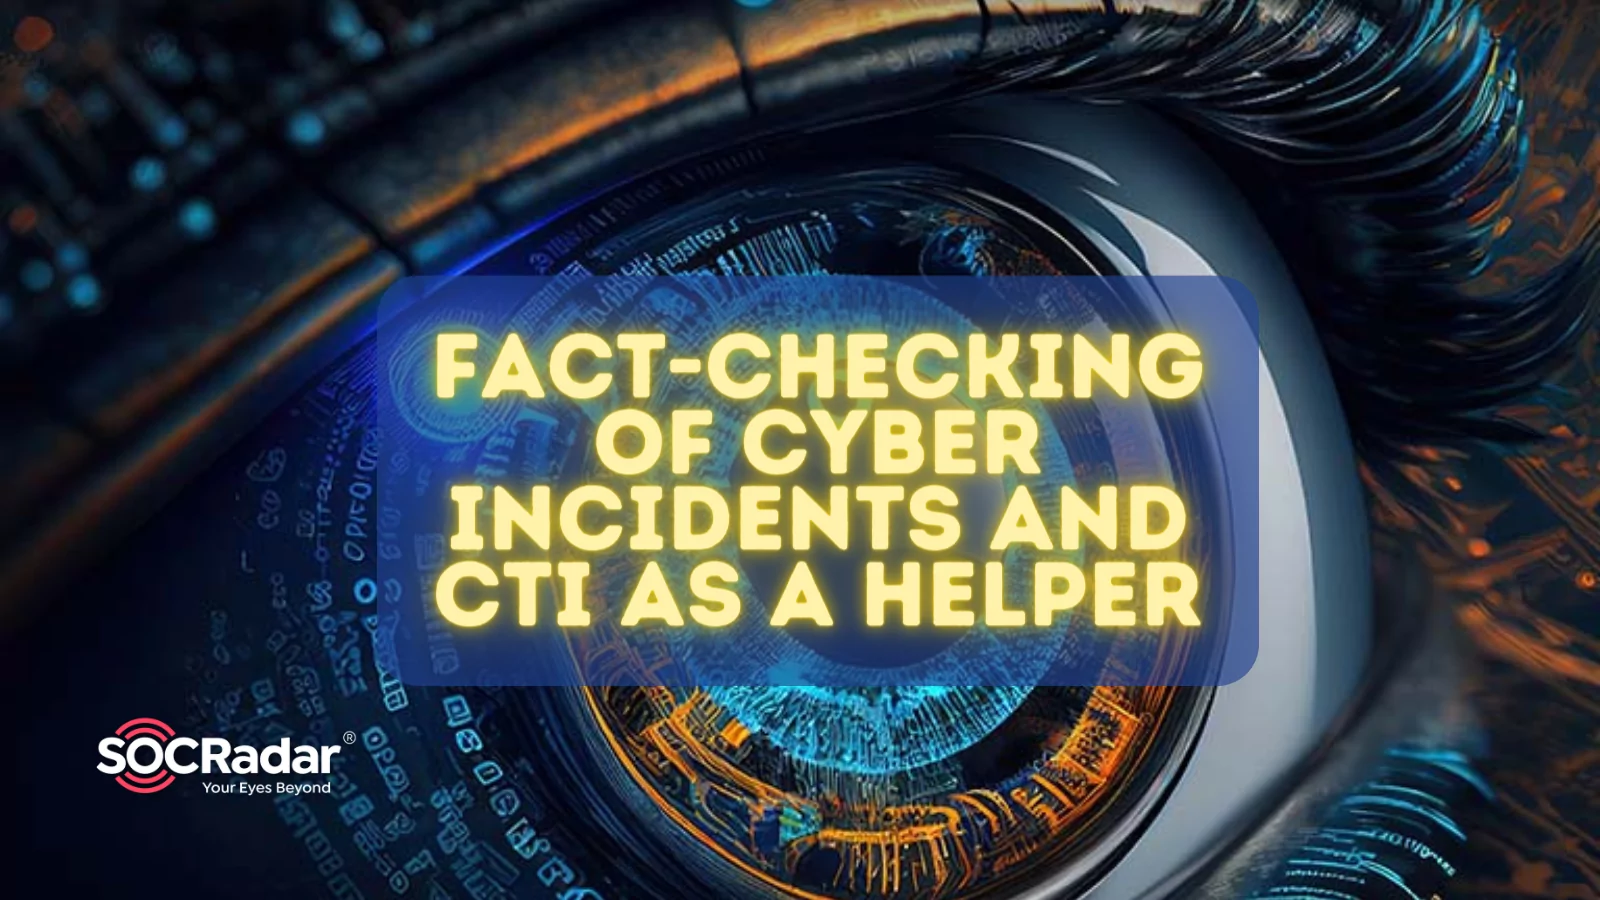 SOCRadar® Cyber Intelligence Inc. | Fact-Checking of Cyber Incidents and CTI as a Helper